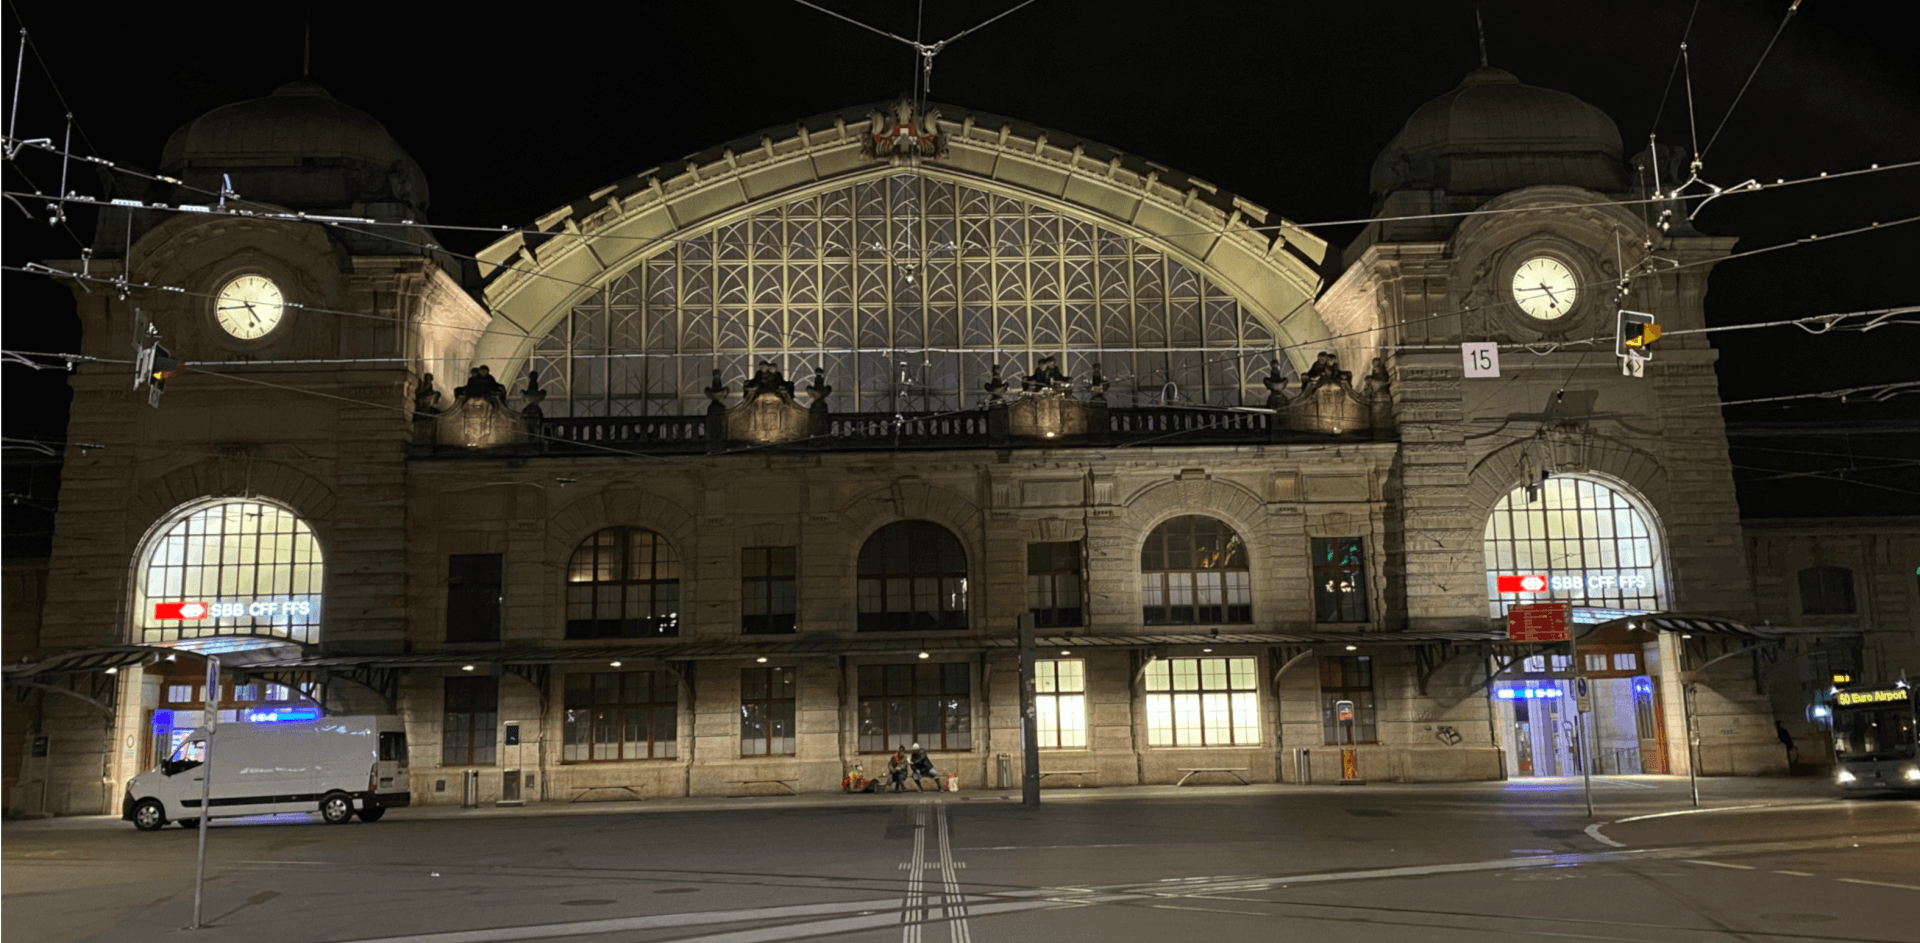 Basel central train station at 4:45 a.m.